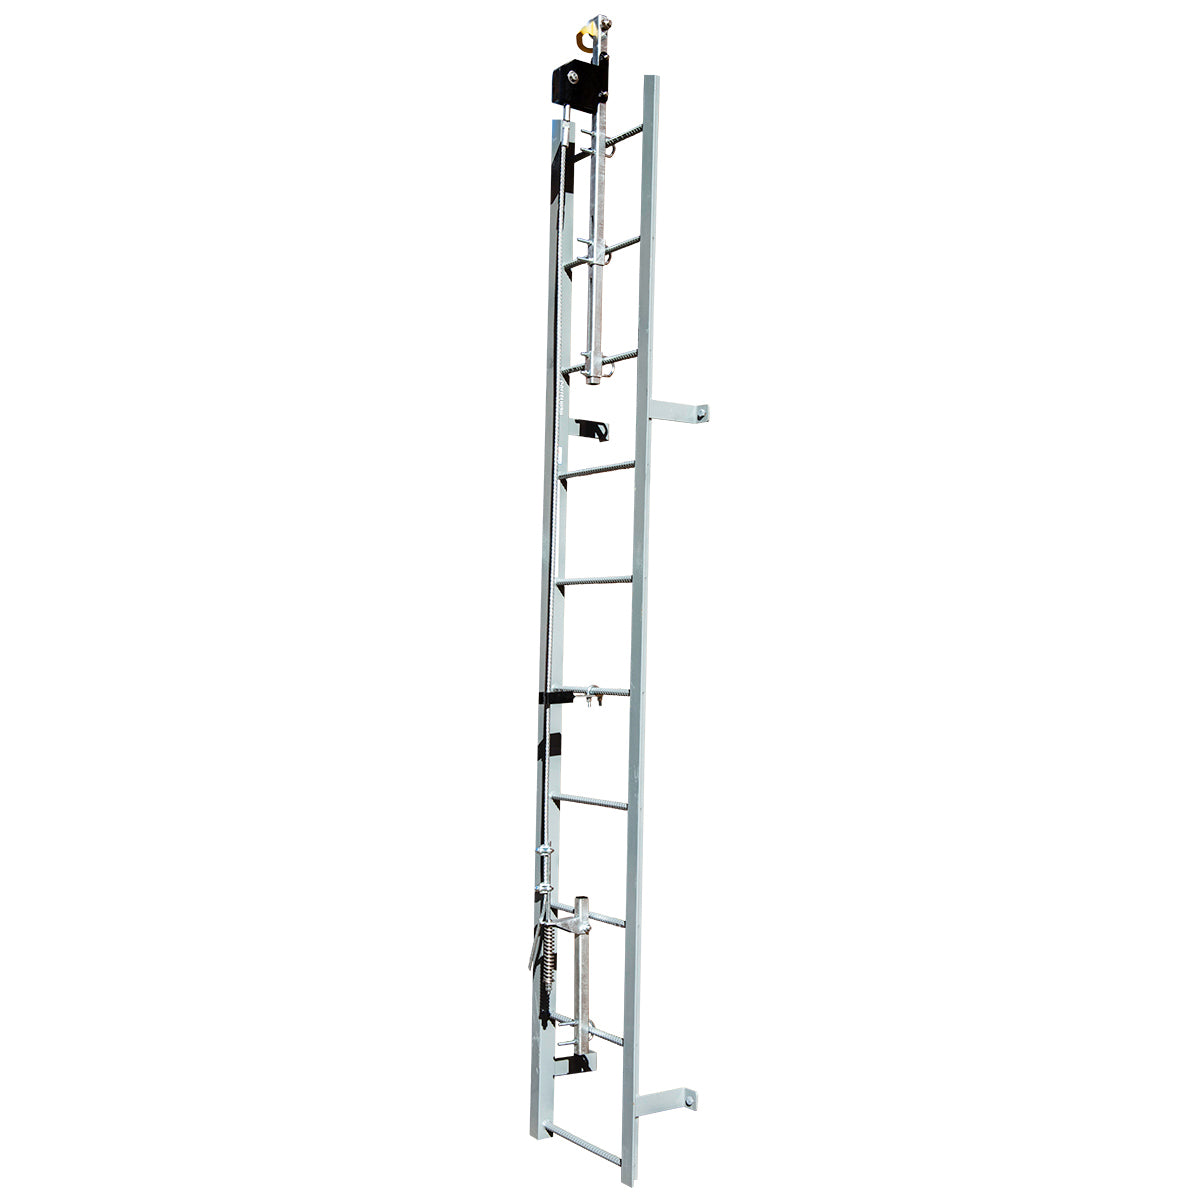 90' Ladder Climb System, 4-Person Complete Kit